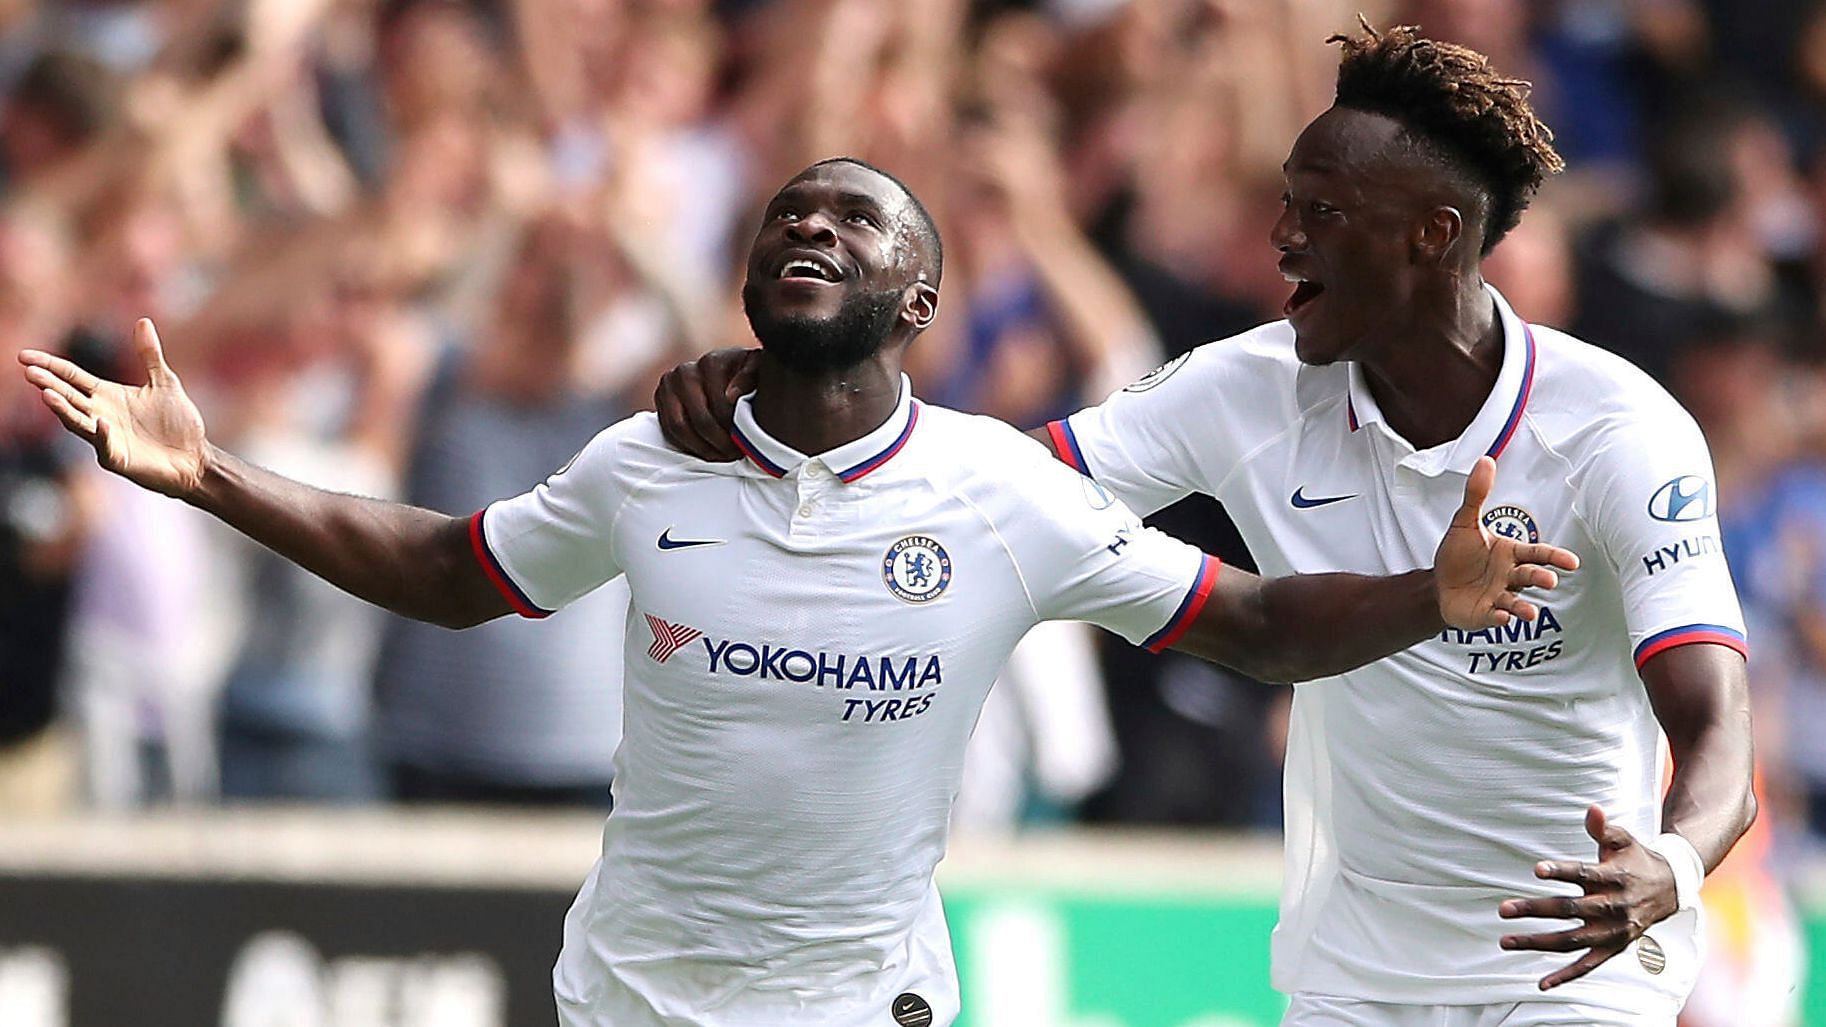 Chelsea’s Fikayo Tomori, left, celebrates scoring his side’s first goal of the game with teammate Tammy Abraham during their English Premier League soccer match.